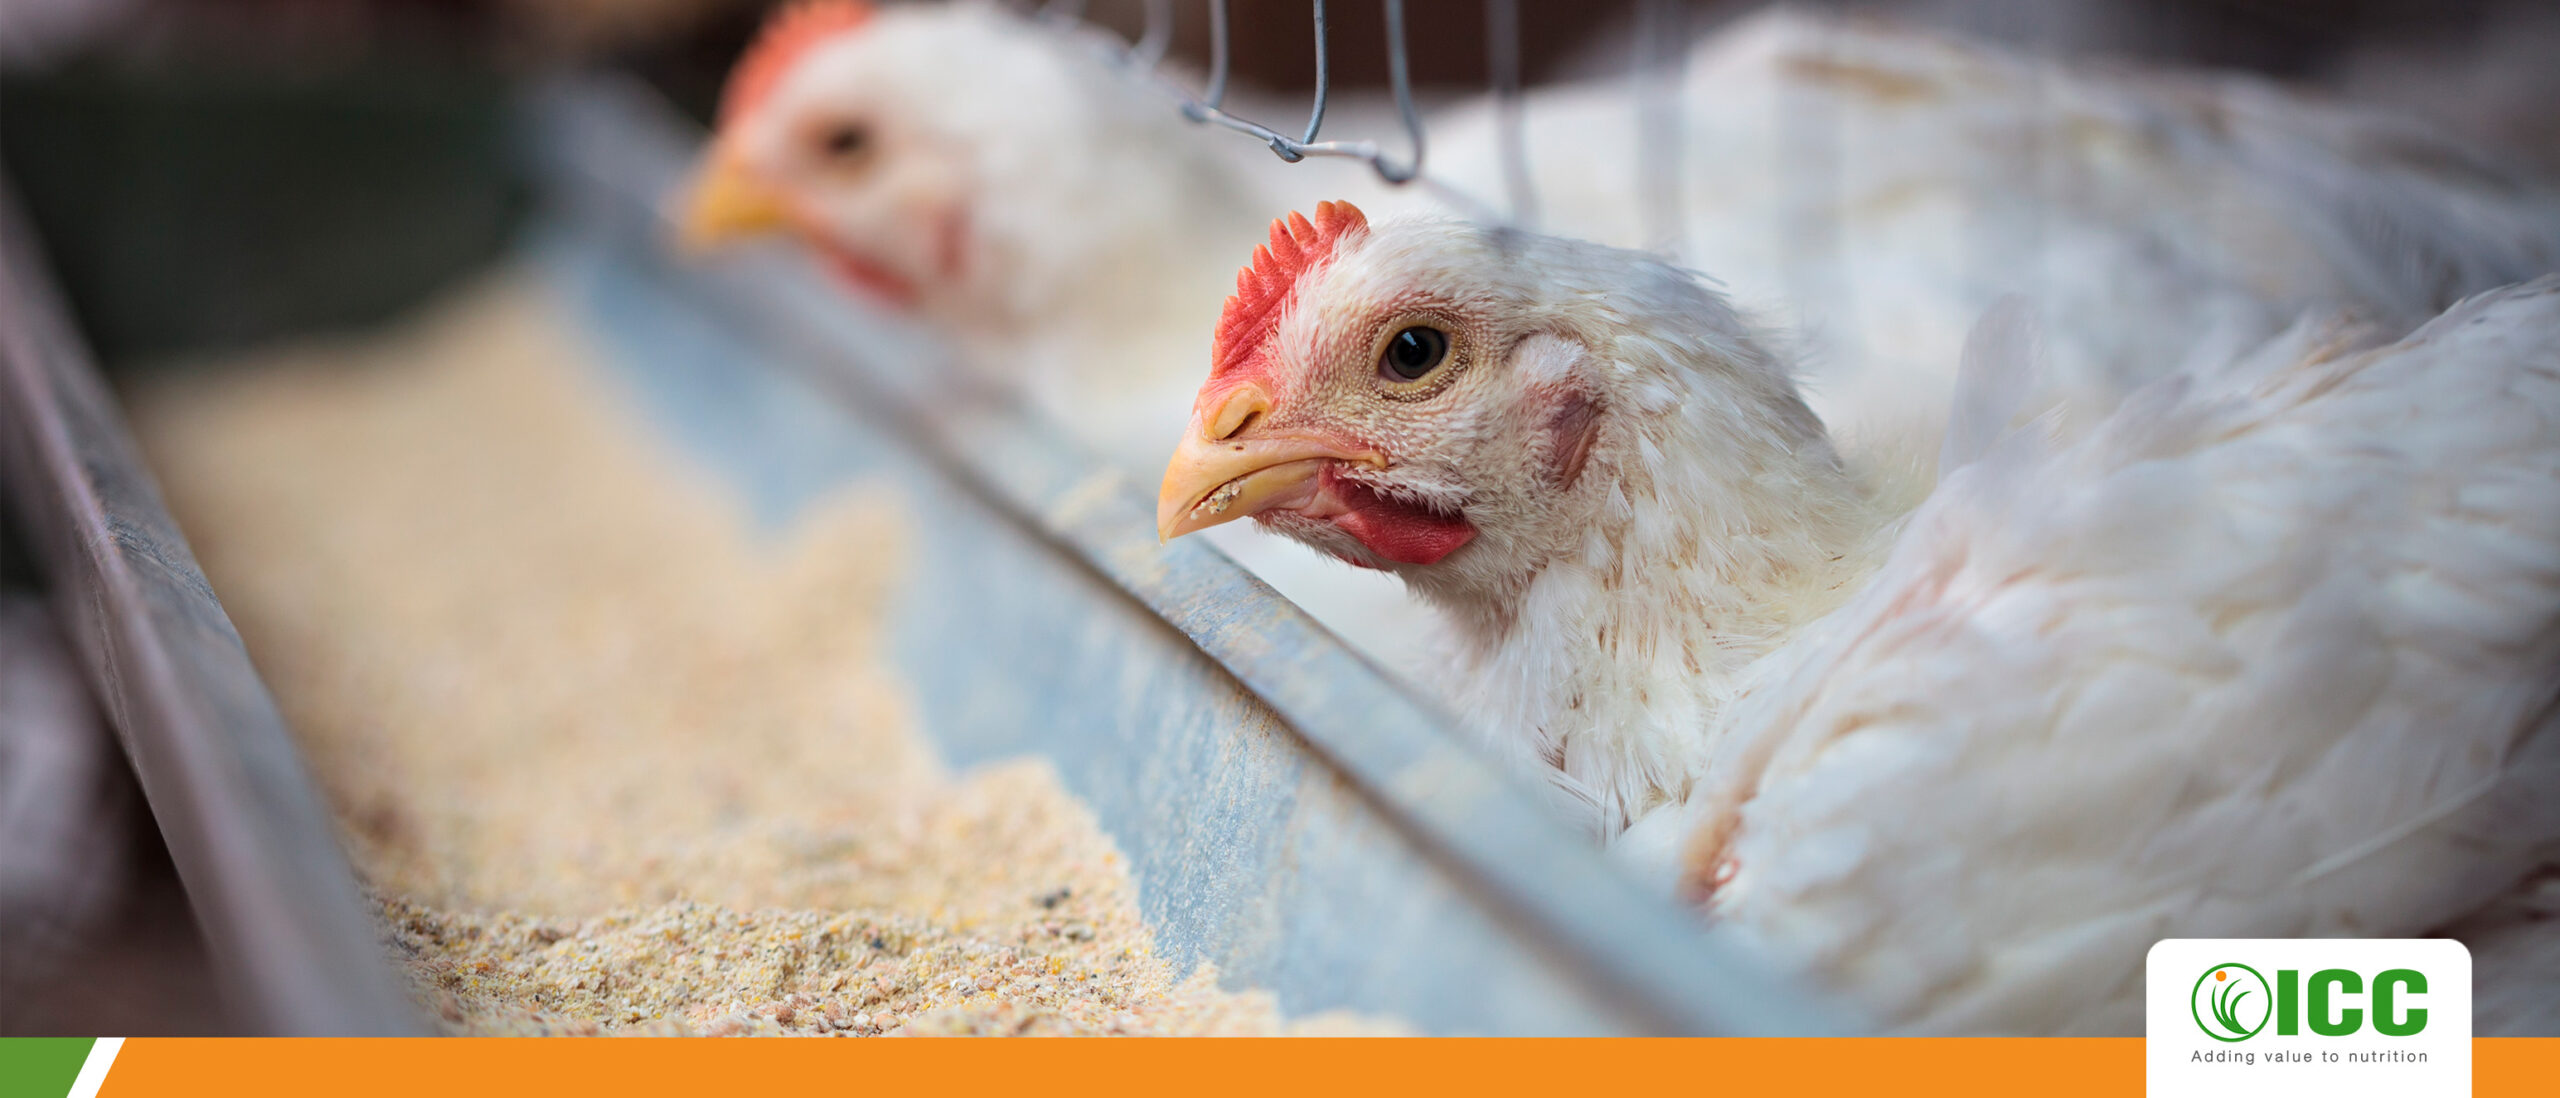 Immune response of broilers challenge with aflatoxin: immunomodulation and mycotoxin effects